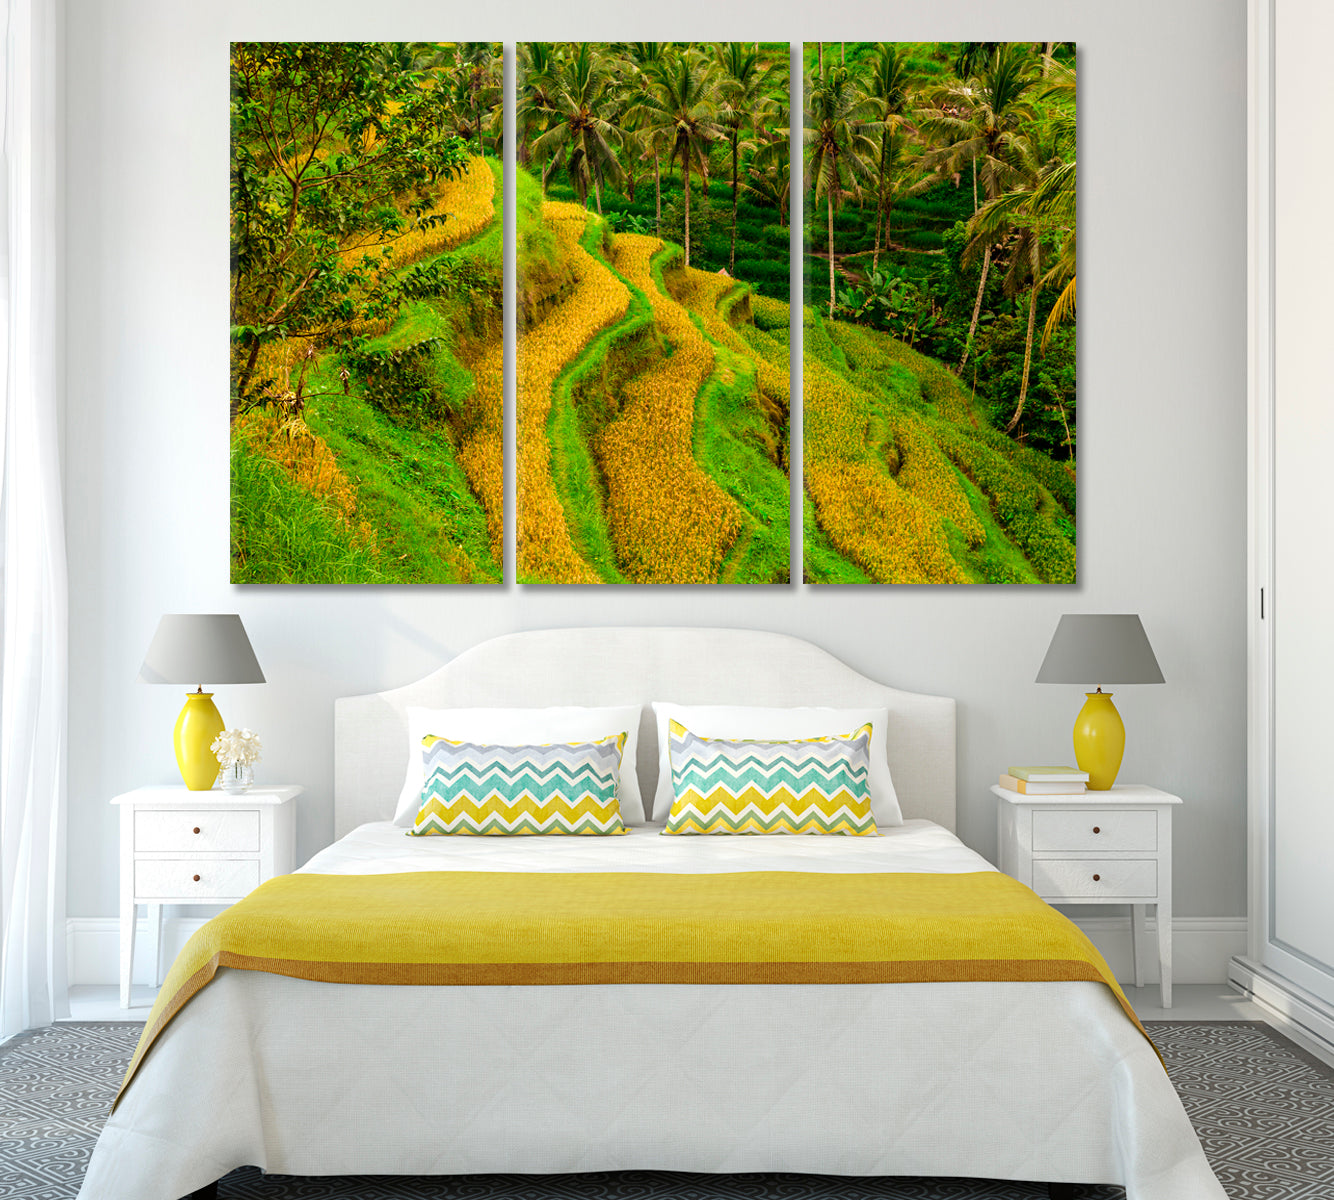 Beautiful Rice Terraces at Ubud Bali Indonesia Canvas Print ArtLexy 3 Panels 36"x24" inches 